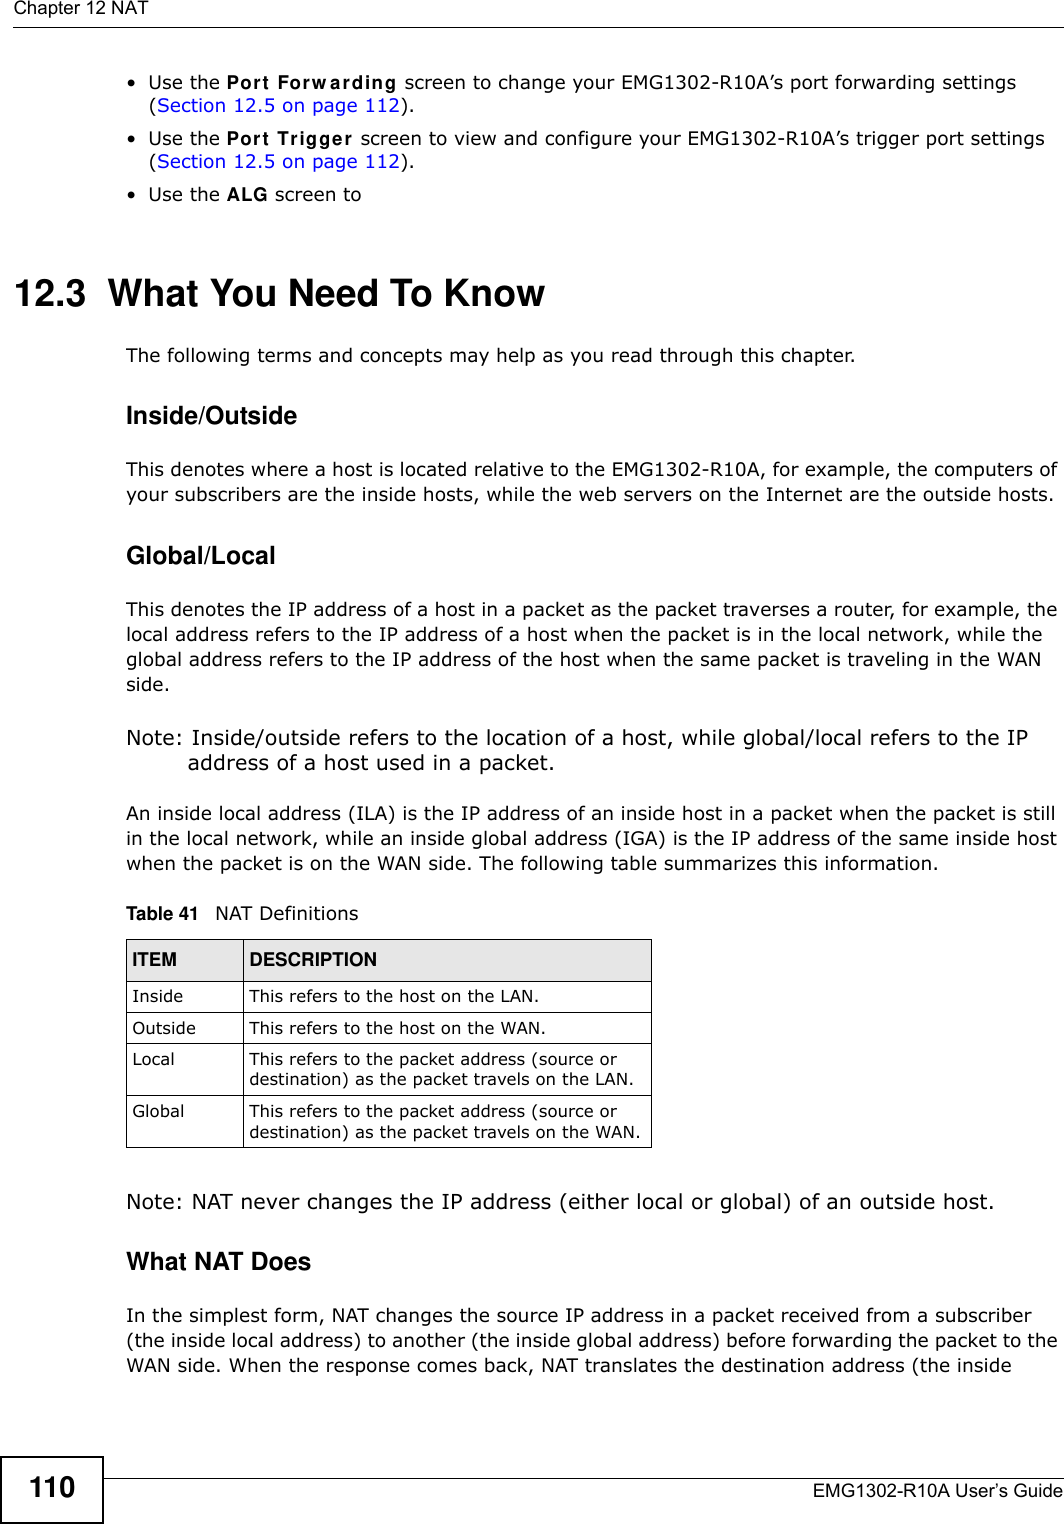 Chapter 12 NATEMG1302-R10A User’s Guide110•Use the Port For w arding screen to change your EMG1302-R10A’s port forwarding settings (Section 12.5 on page 112).•Use the Port Trigger screen to view and configure your EMG1302-R10A’s trigger port settings (Section 12.5 on page 112).•Use the ALG screen to 12.3  What You Need To KnowThe following terms and concepts may help as you read through this chapter.Inside/OutsideThis denotes where a host is located relative to the EMG1302-R10A, for example, the computers of your subscribers are the inside hosts, while the web servers on the Internet are the outside hosts. Global/Local This denotes the IP address of a host in a packet as the packet traverses a router, for example, the local address refers to the IP address of a host when the packet is in the local network, while the global address refers to the IP address of the host when the same packet is traveling in the WAN side. Note: Inside/outside refers to the location of a host, while global/local refers to the IP address of a host used in a packet. An inside local address (ILA) is the IP address of an inside host in a packet when the packet is still in the local network, while an inside global address (IGA) is the IP address of the same inside host when the packet is on the WAN side. The following table summarizes this information.Note: NAT never changes the IP address (either local or global) of an outside host.What NAT DoesIn the simplest form, NAT changes the source IP address in a packet received from a subscriber (the inside local address) to another (the inside global address) before forwarding the packet to the WAN side. When the response comes back, NAT translates the destination address (the inside Table 41   NAT DefinitionsITEM DESCRIPTIONInside This refers to the host on the LAN.Outside This refers to the host on the WAN.Local This refers to the packet address (source or destination) as the packet travels on the LAN.Global This refers to the packet address (source or destination) as the packet travels on the WAN.